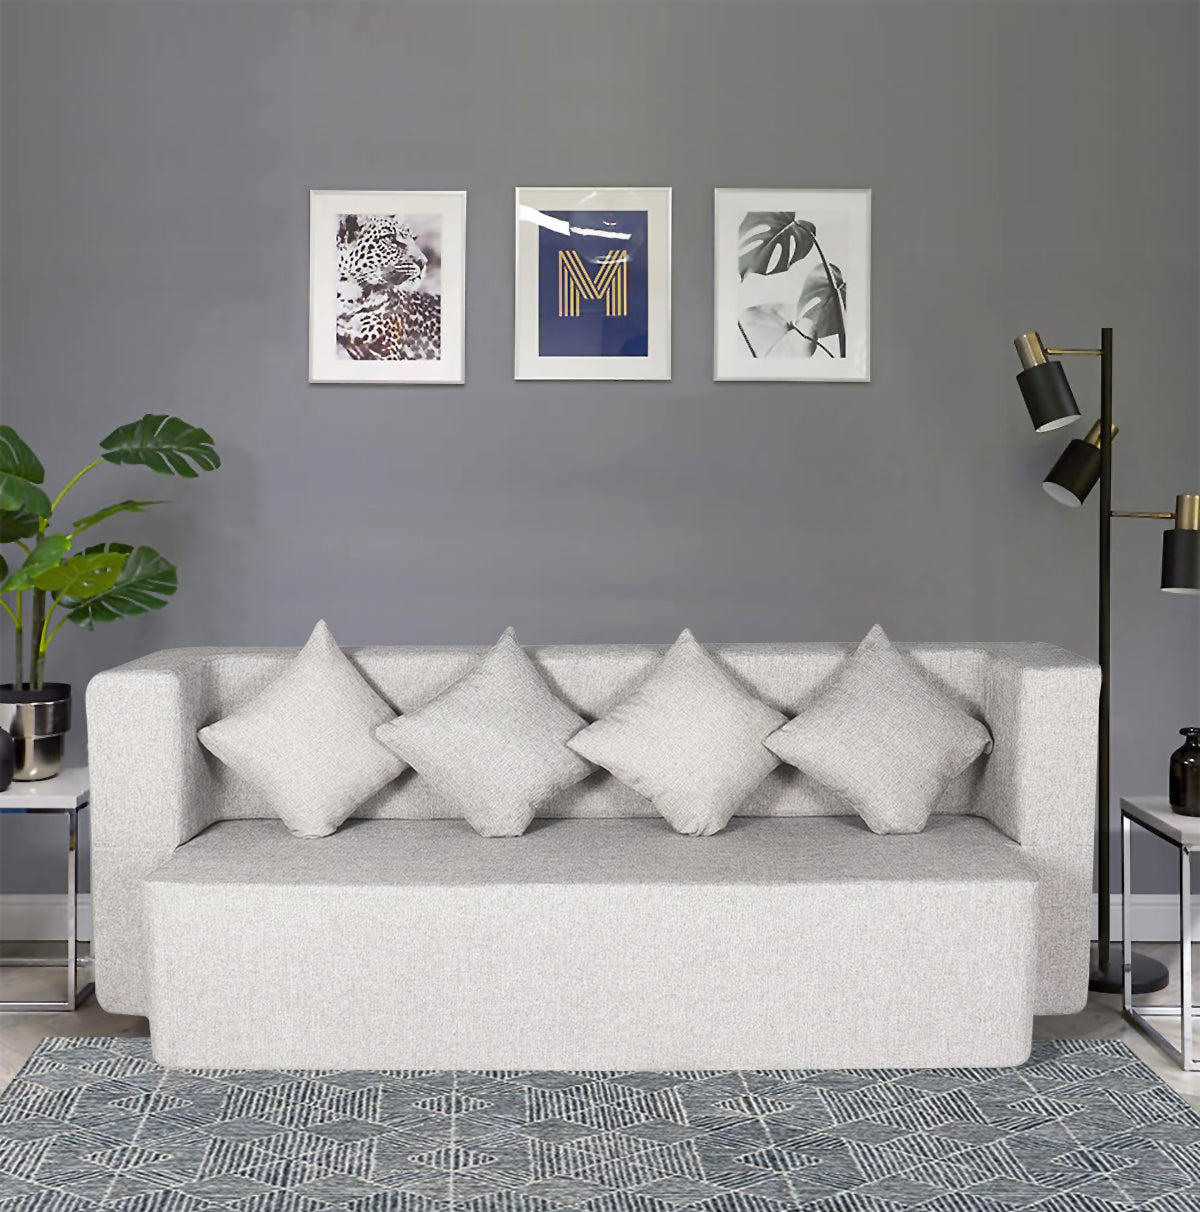 Cover of Light Grey Jute Fabric (78"x36"x14") FlipperX Sofa cum Bed with 4 Plain Cushion Covers